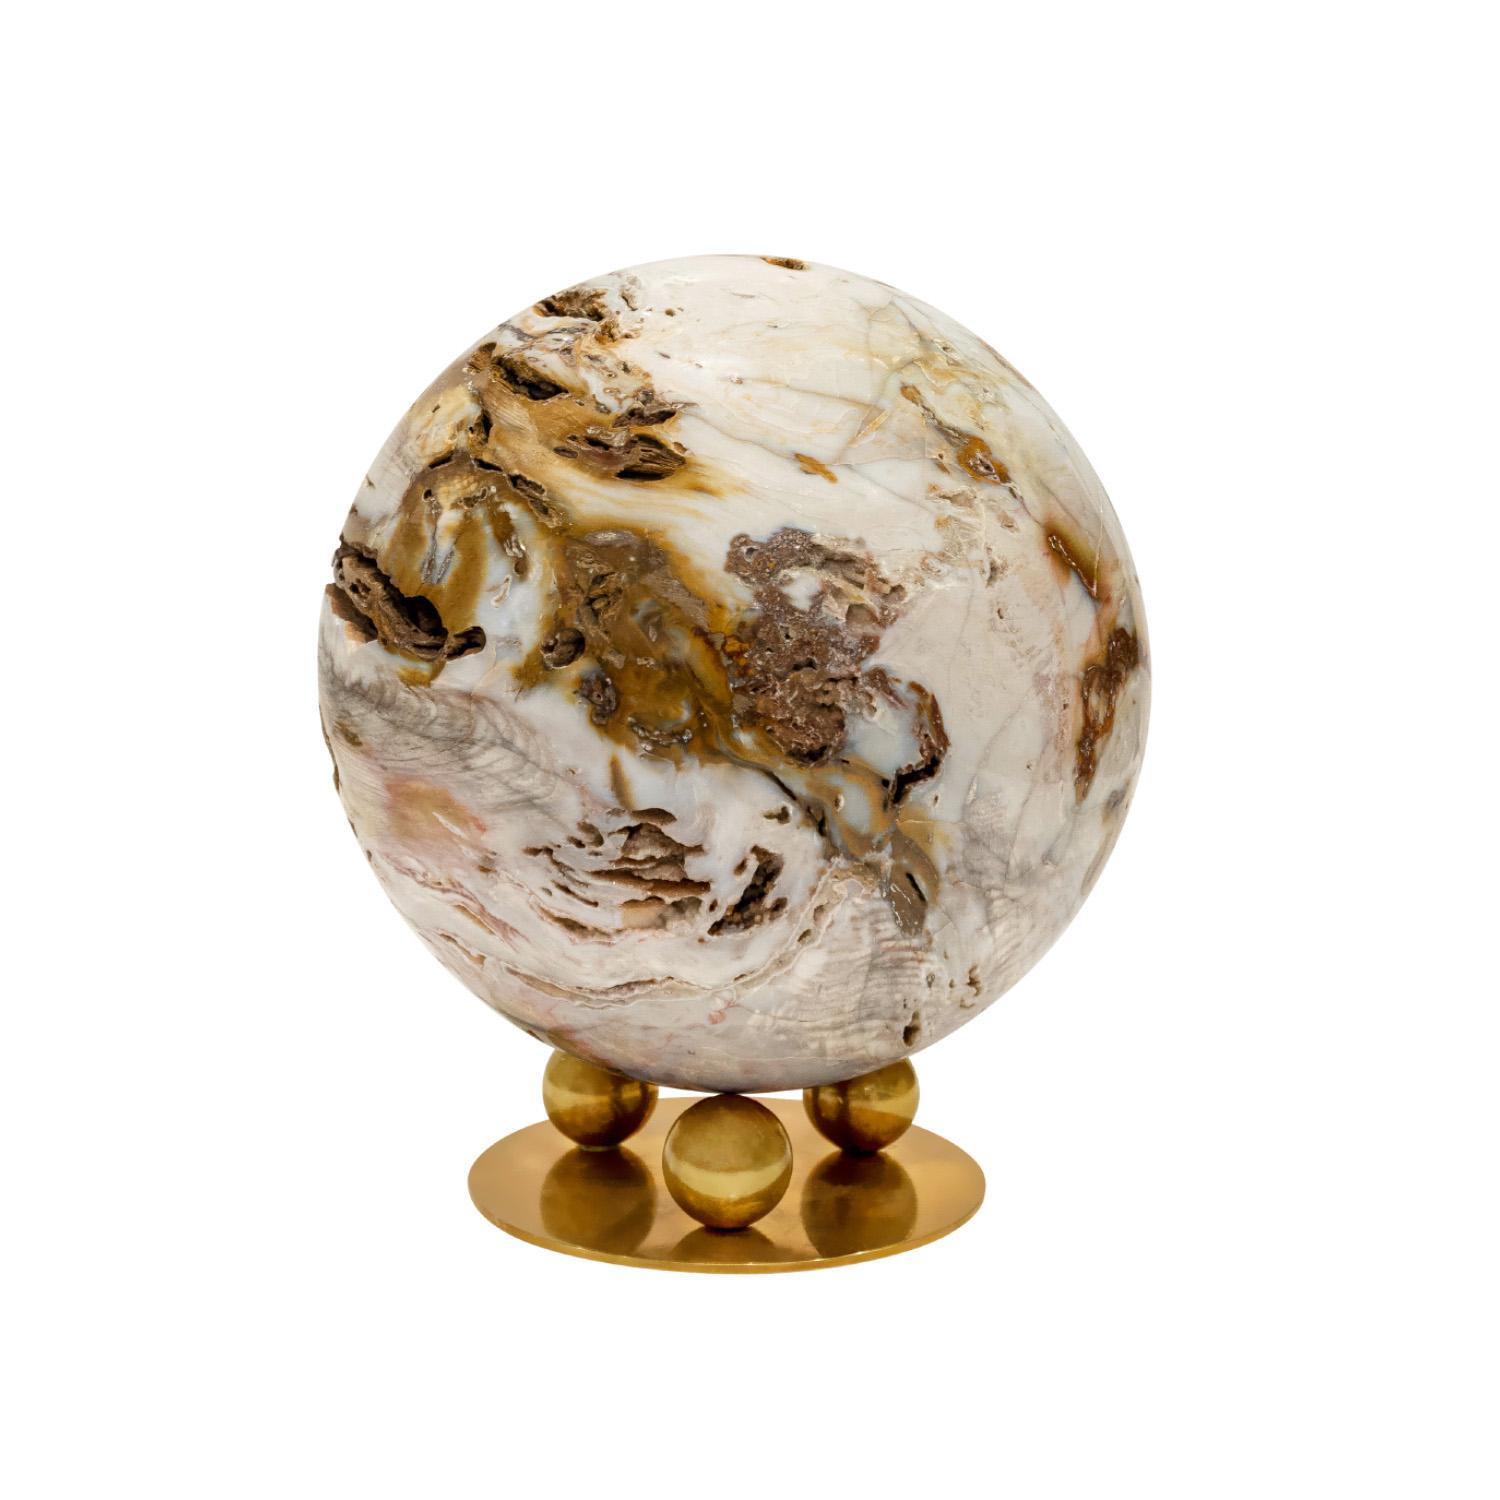 Remarkable unique large polished petrified wood orb on custom brass base by Karl Springer, American 1980s. Exotic materials and superb craftsmanship were the hallmark’s of Karl Springer’s design ethos. Because the petrified wood was organic, it has